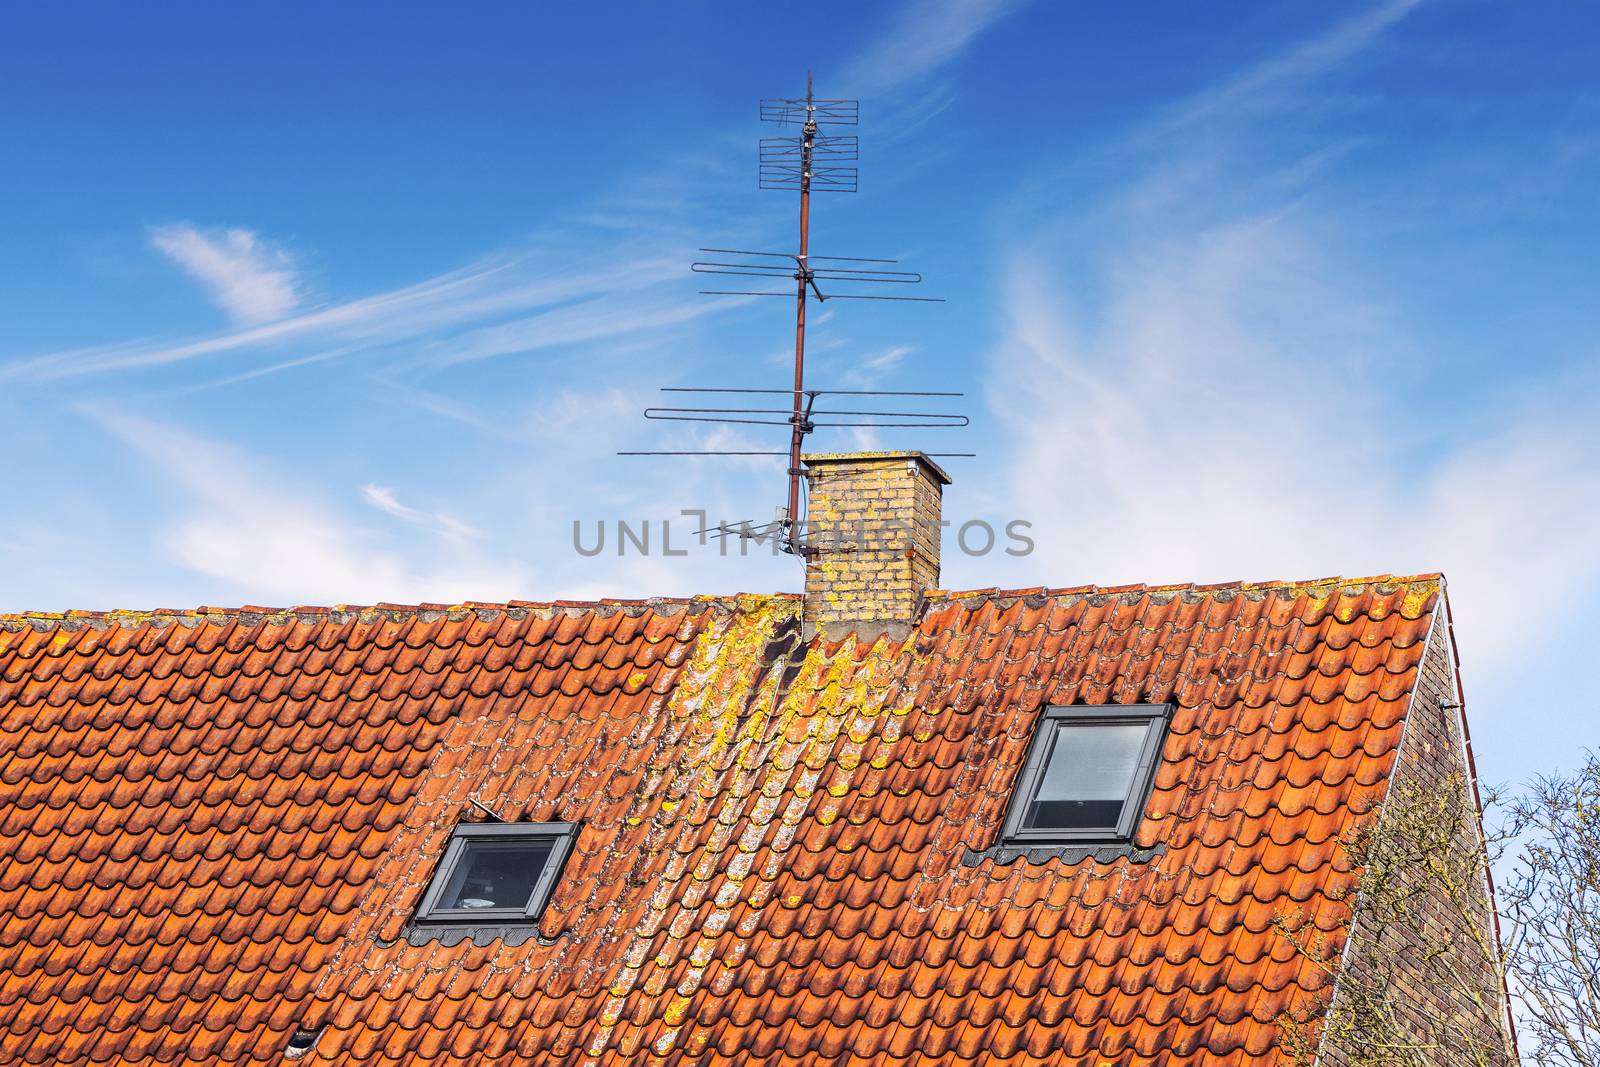 Rooftop with an antenna and a chimney under a blue sky in the summer with two small windows beneath